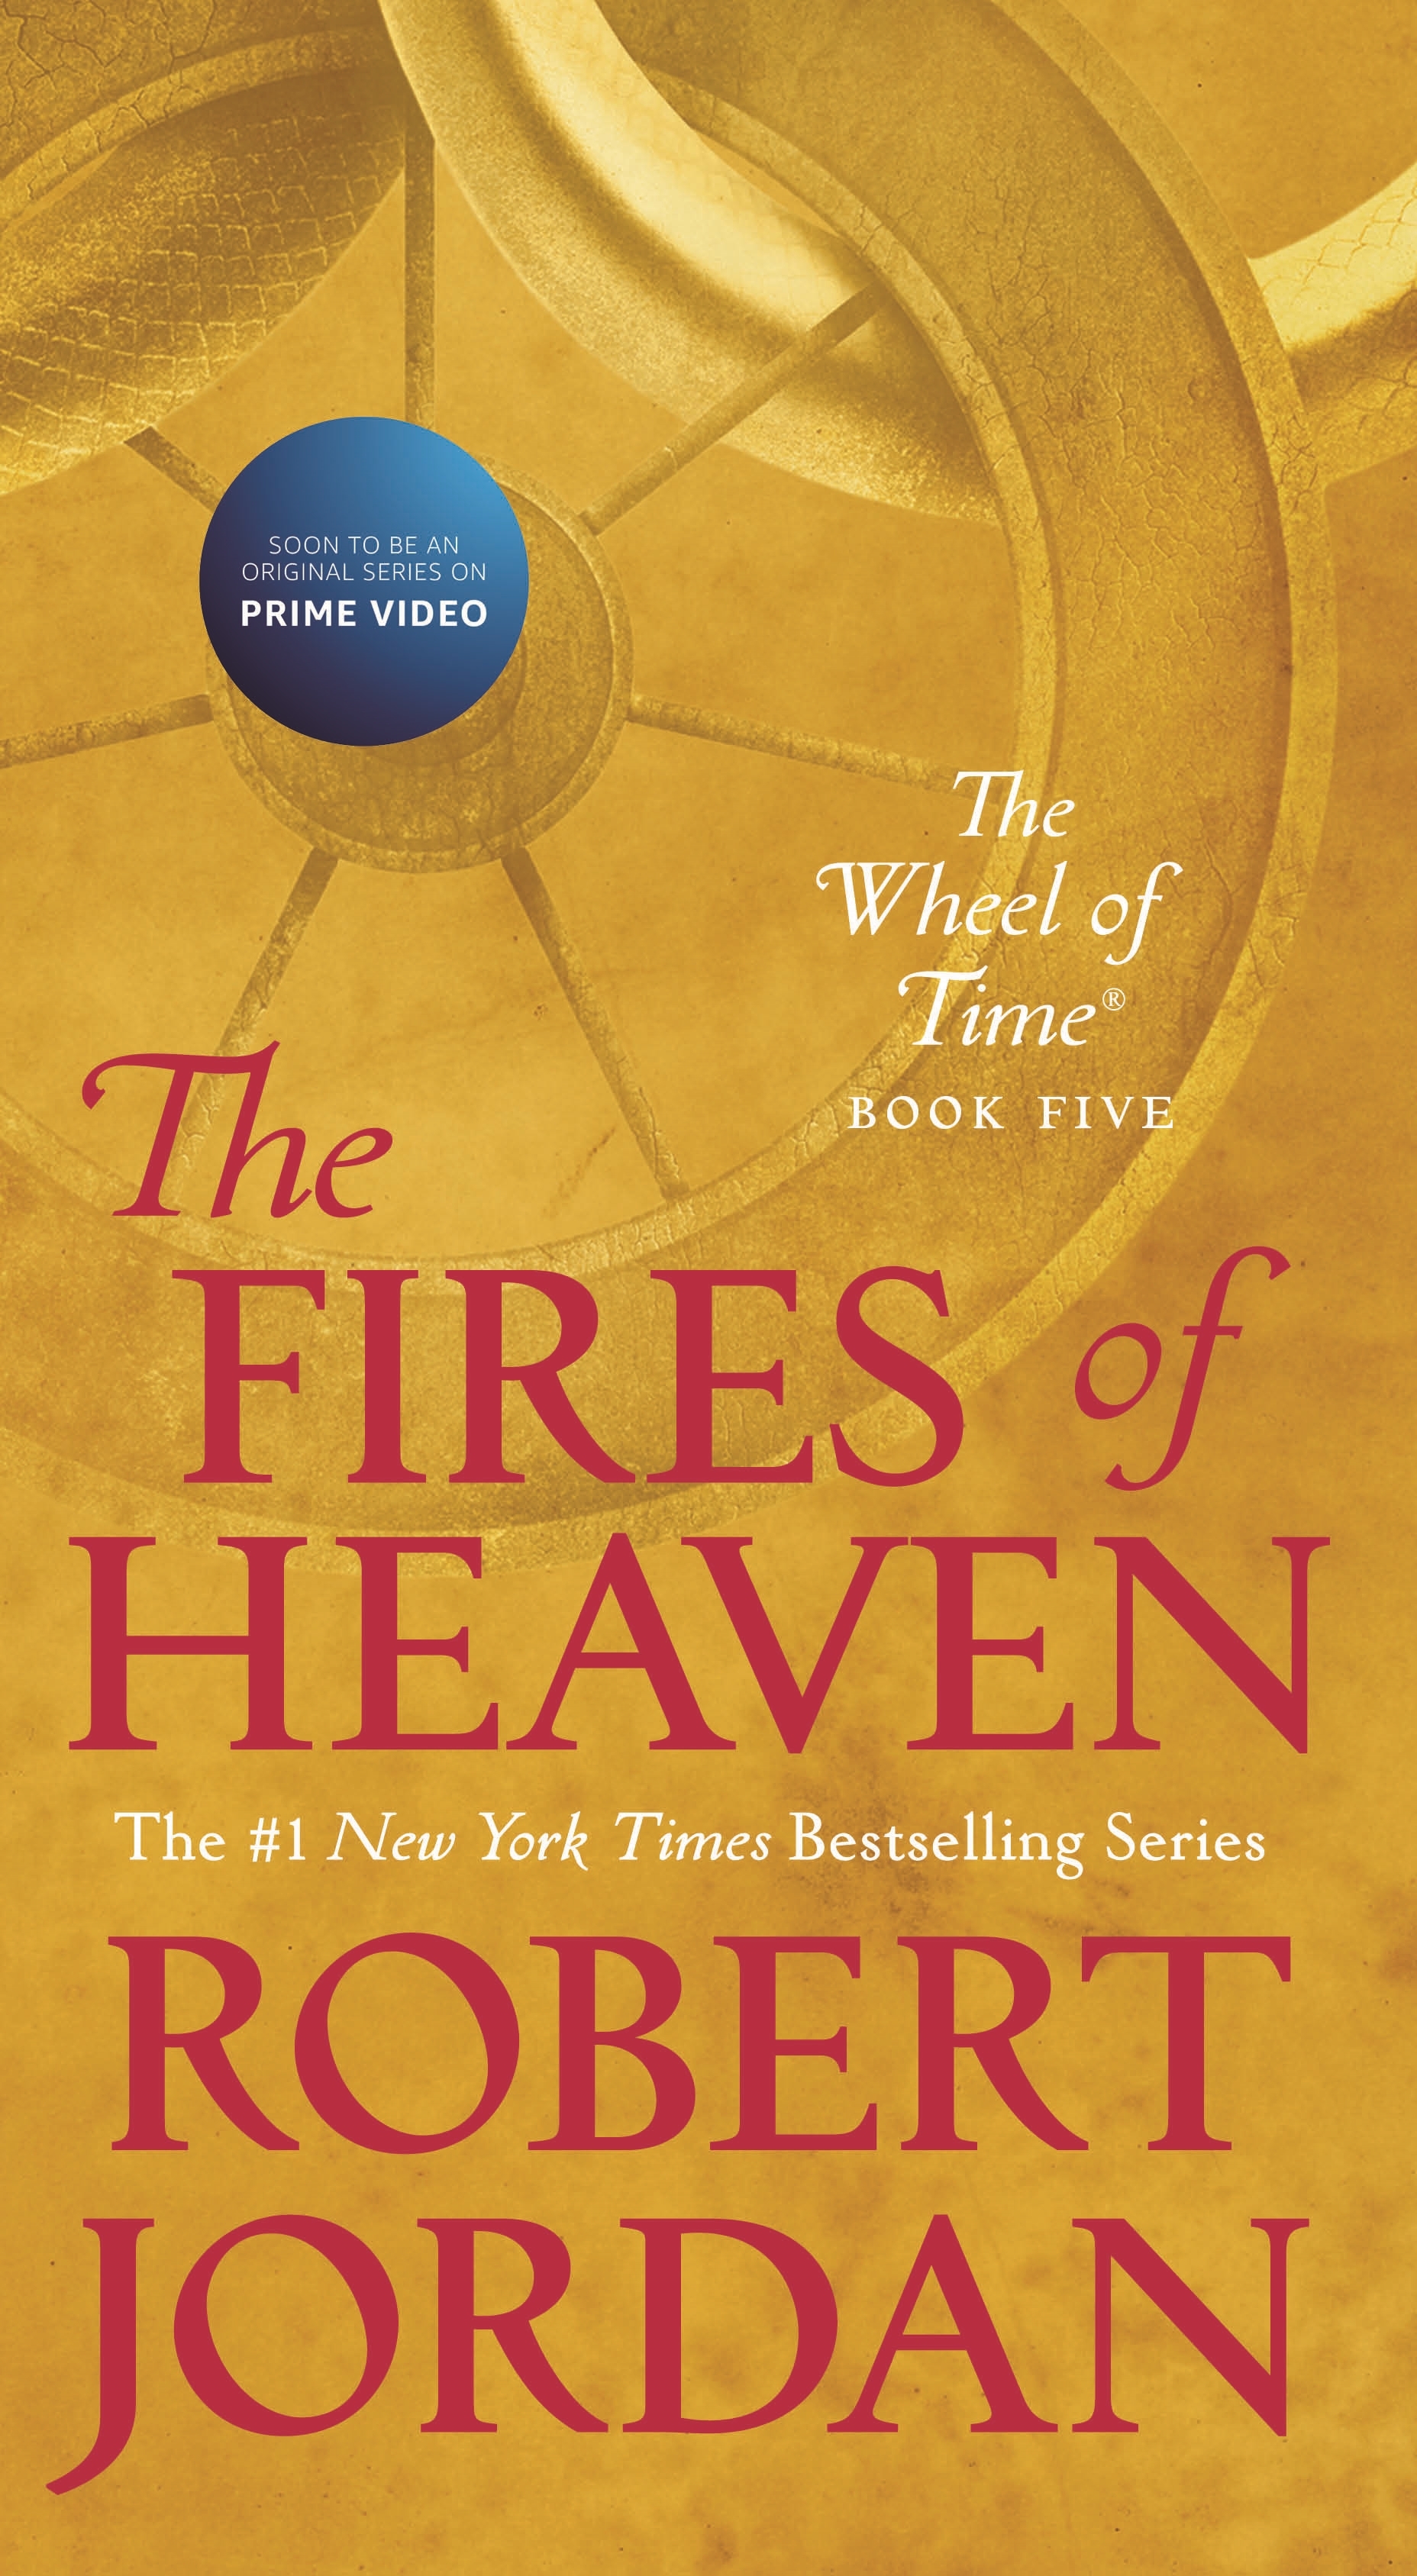 The Fires of Heaven : Book Five of 'The Wheel of Time' by Robert Jordan